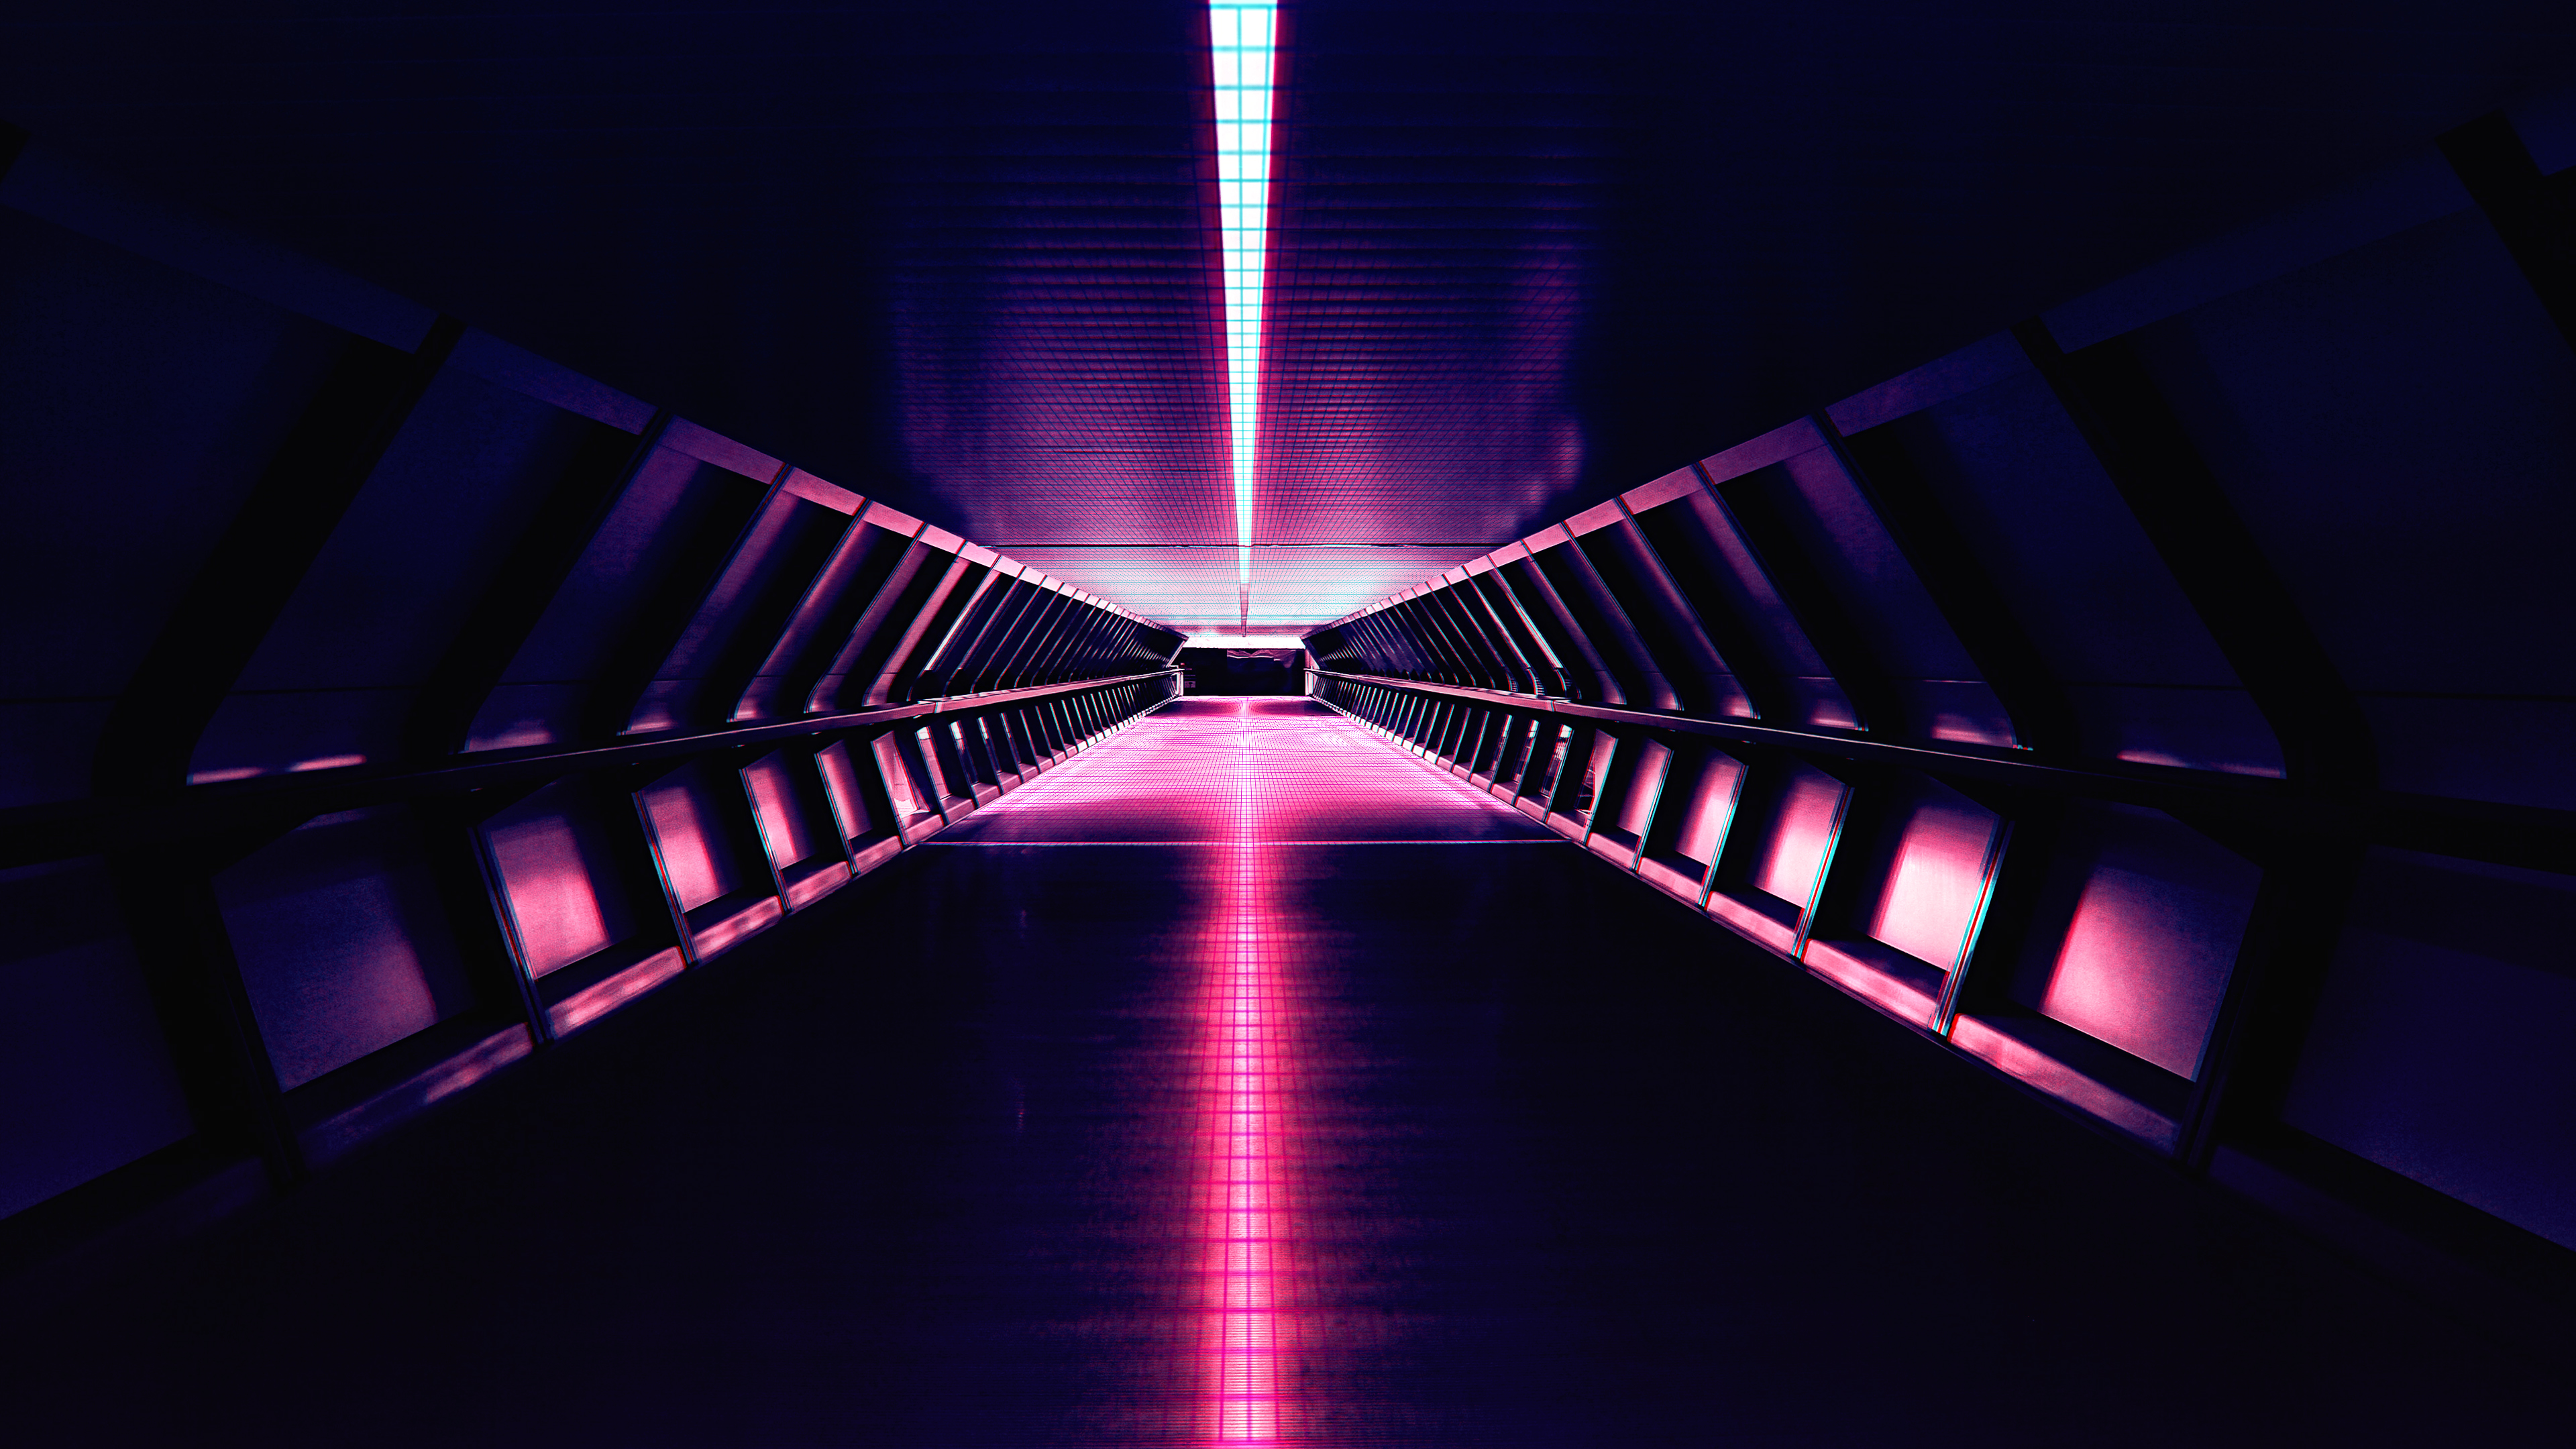 OC Synthwave - Aesthetic Corridor - 4k by Total-Chuck on ...